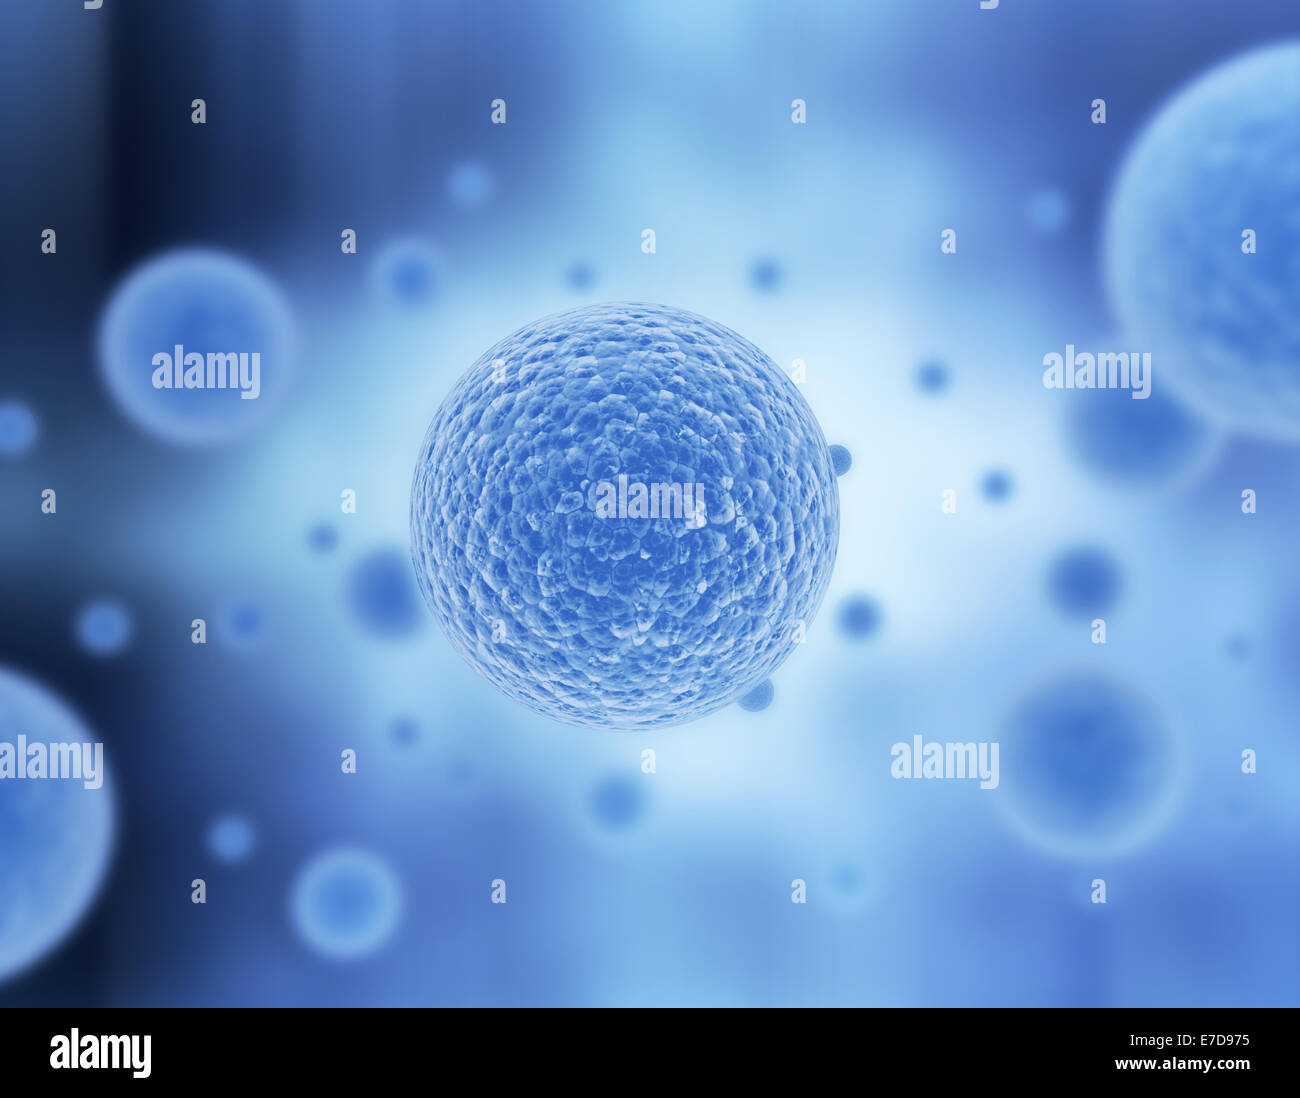 Illustration multiplication of cells in blue Stock Photo